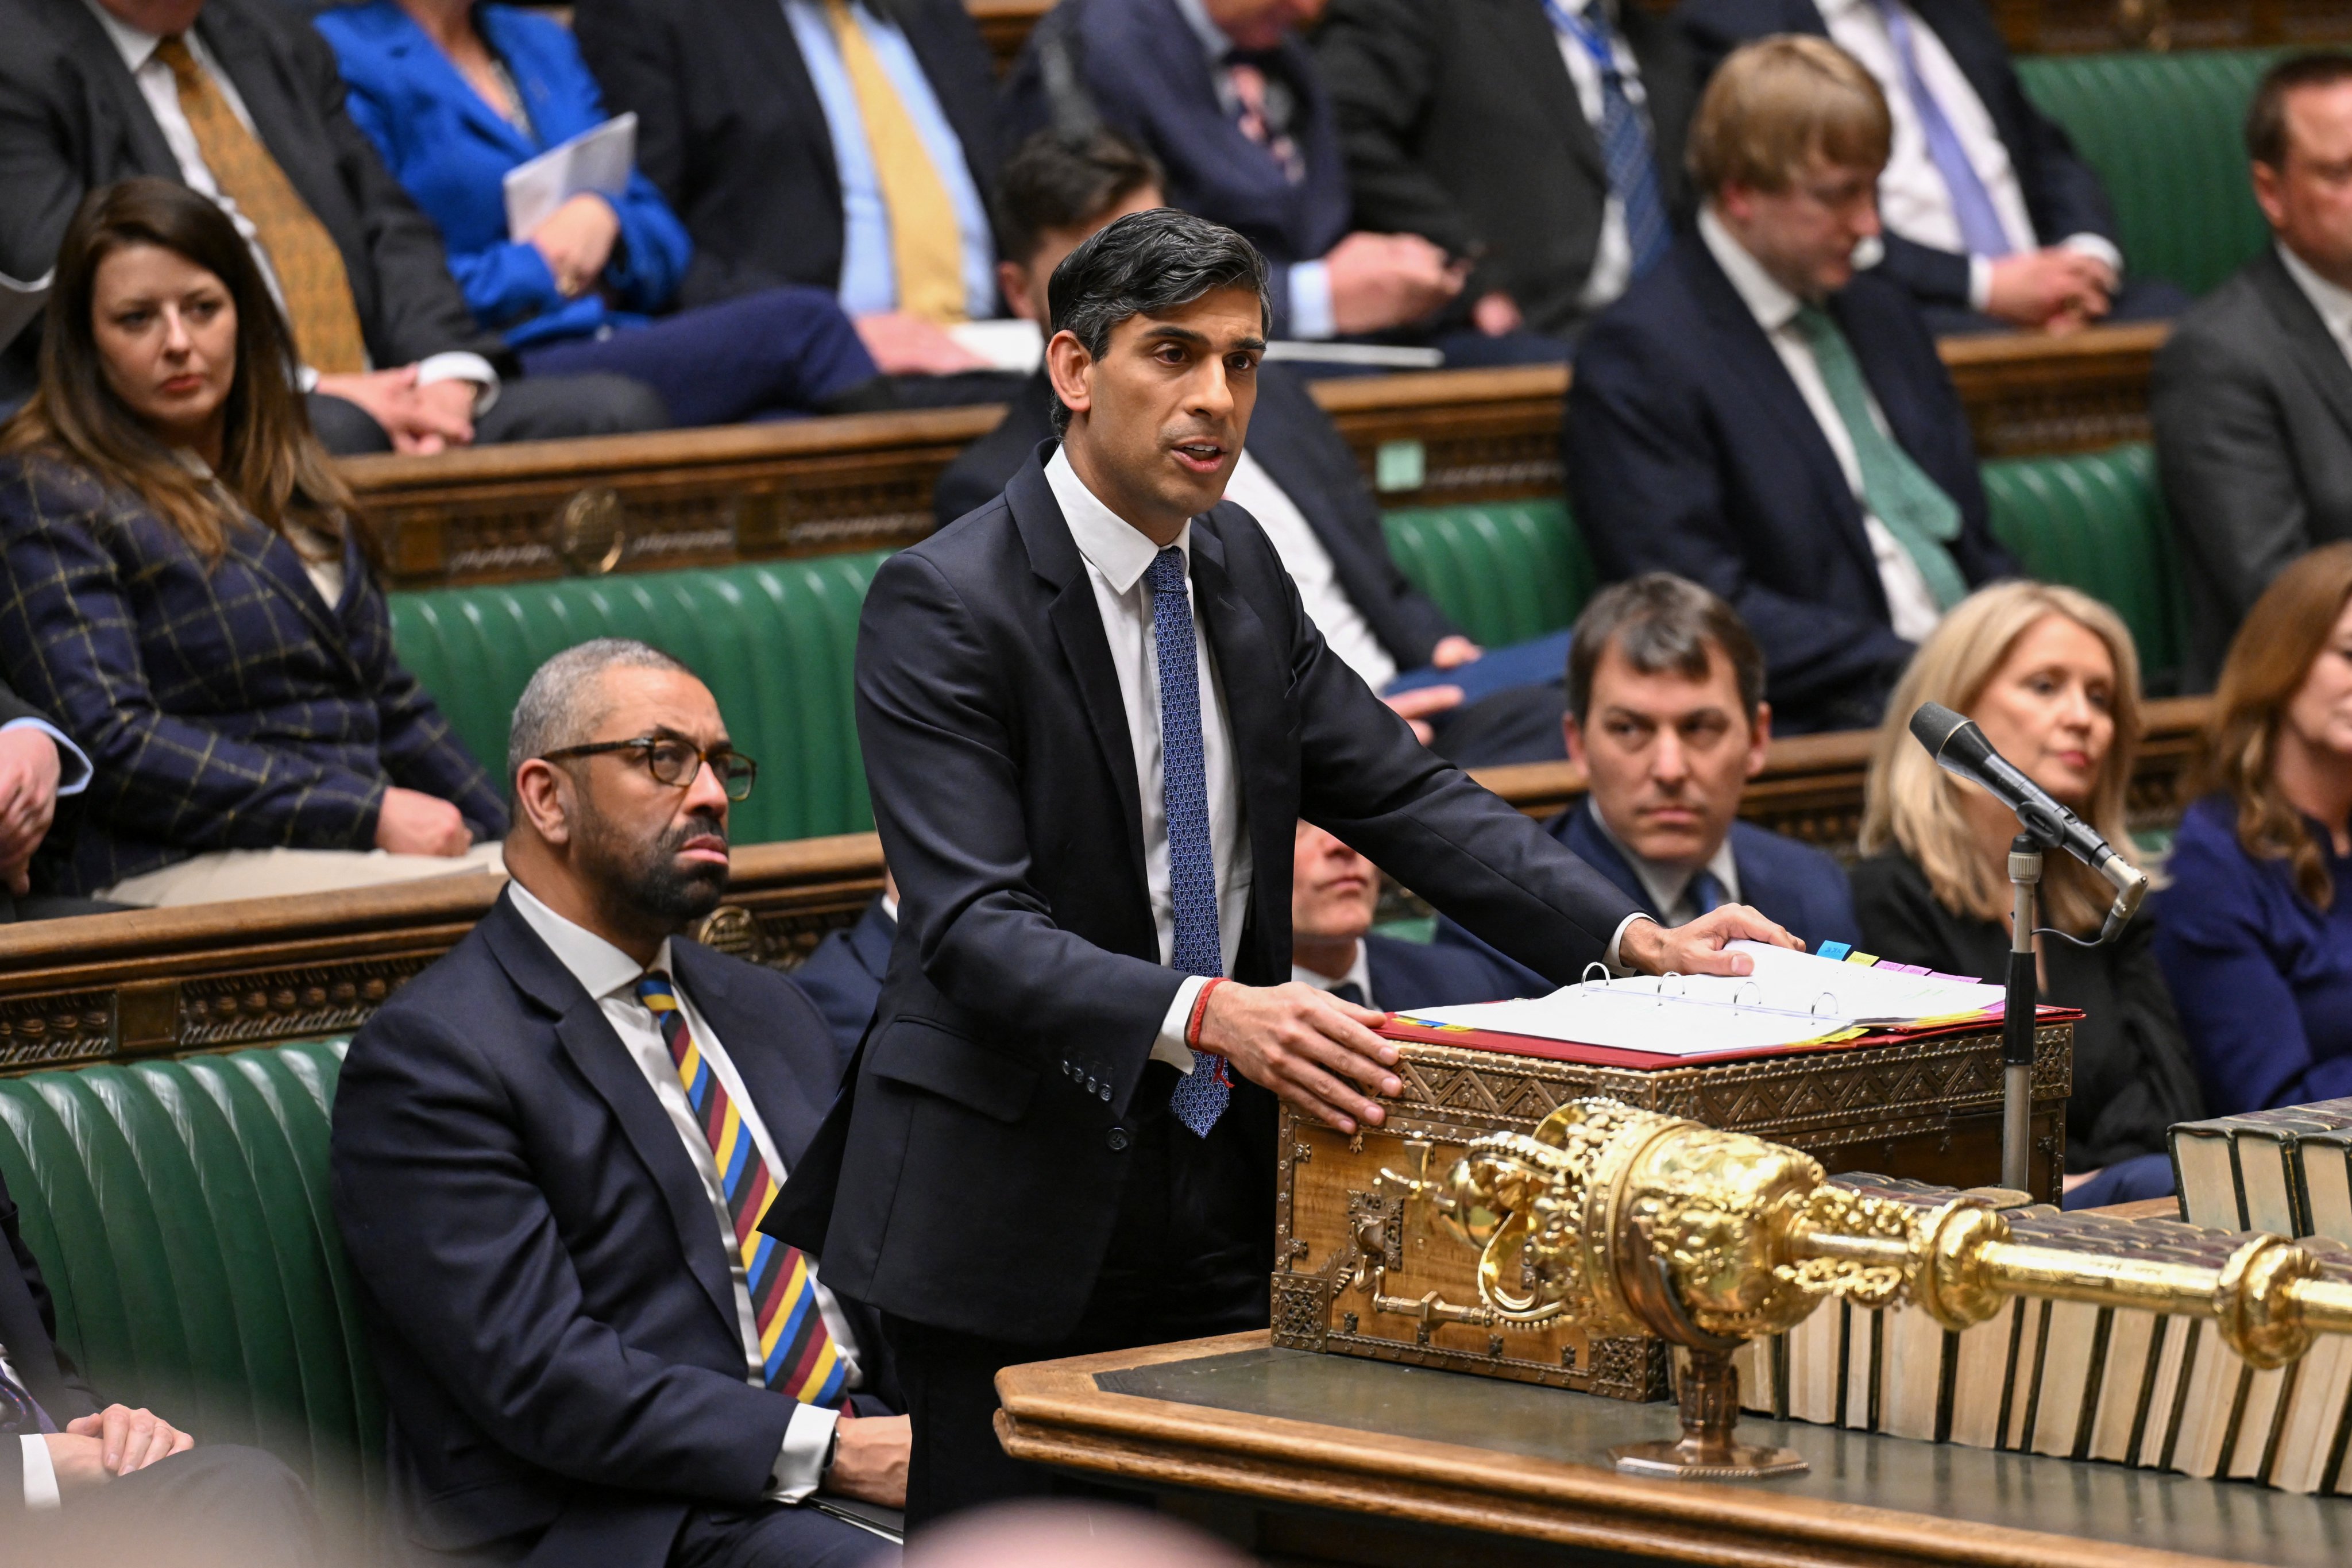 British Prime Minister Rishi Sunak speaks at the House of Commons in London on Monday. Photo: UK Parliament / Jessica Taylor / Handout via Reuters